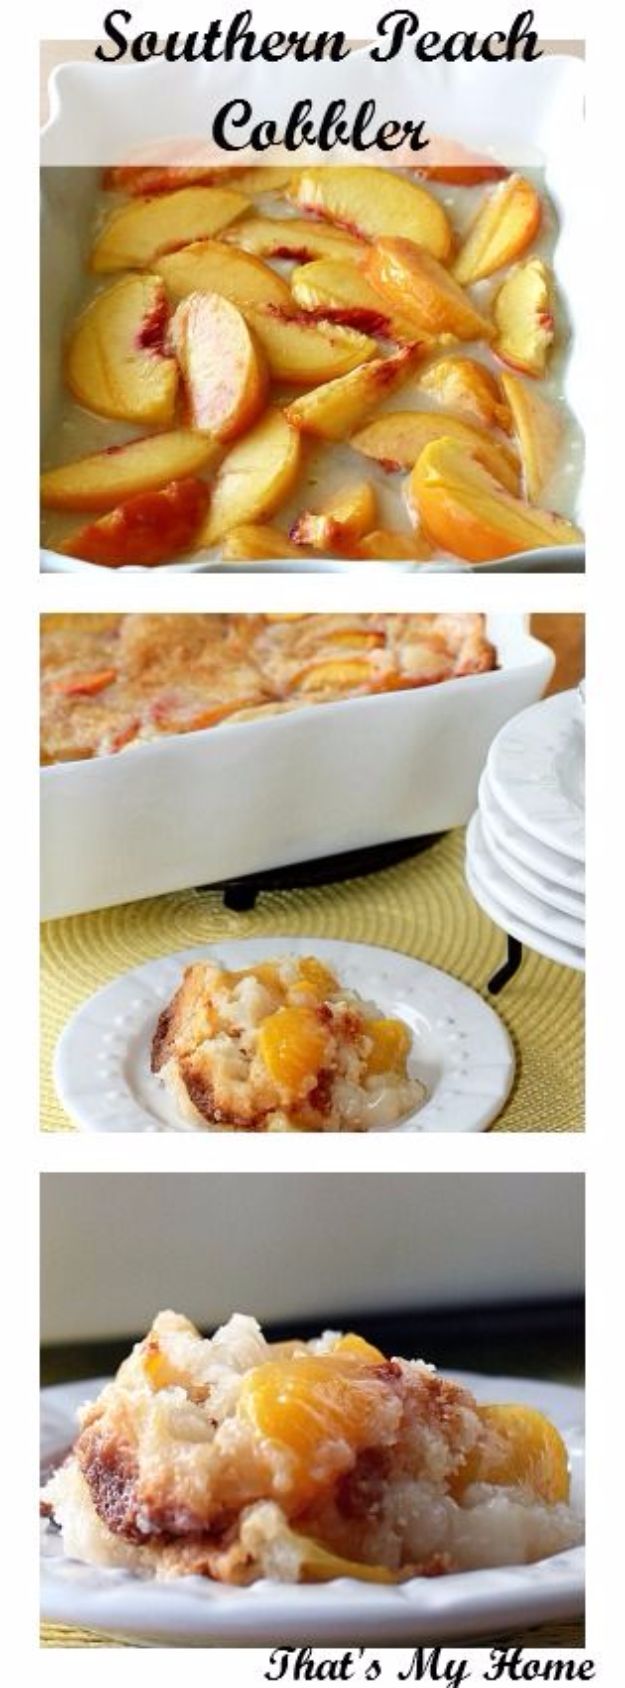 Best Country Cooking Dessert Recipes - Southern Peach Cobbler - Easy Recipes for Country Food Like Chicken Fried Steak, Fried Green Tomatoes, Southern Gravy, Breads and Biscuits, Casseroles and More - Breakfast, Lunch and Dinner Recipe Ideas for Families and Feeding A Crowd - Step by Step Instructions for Making Homestyle Dips, Snacks, Desserts #recipes